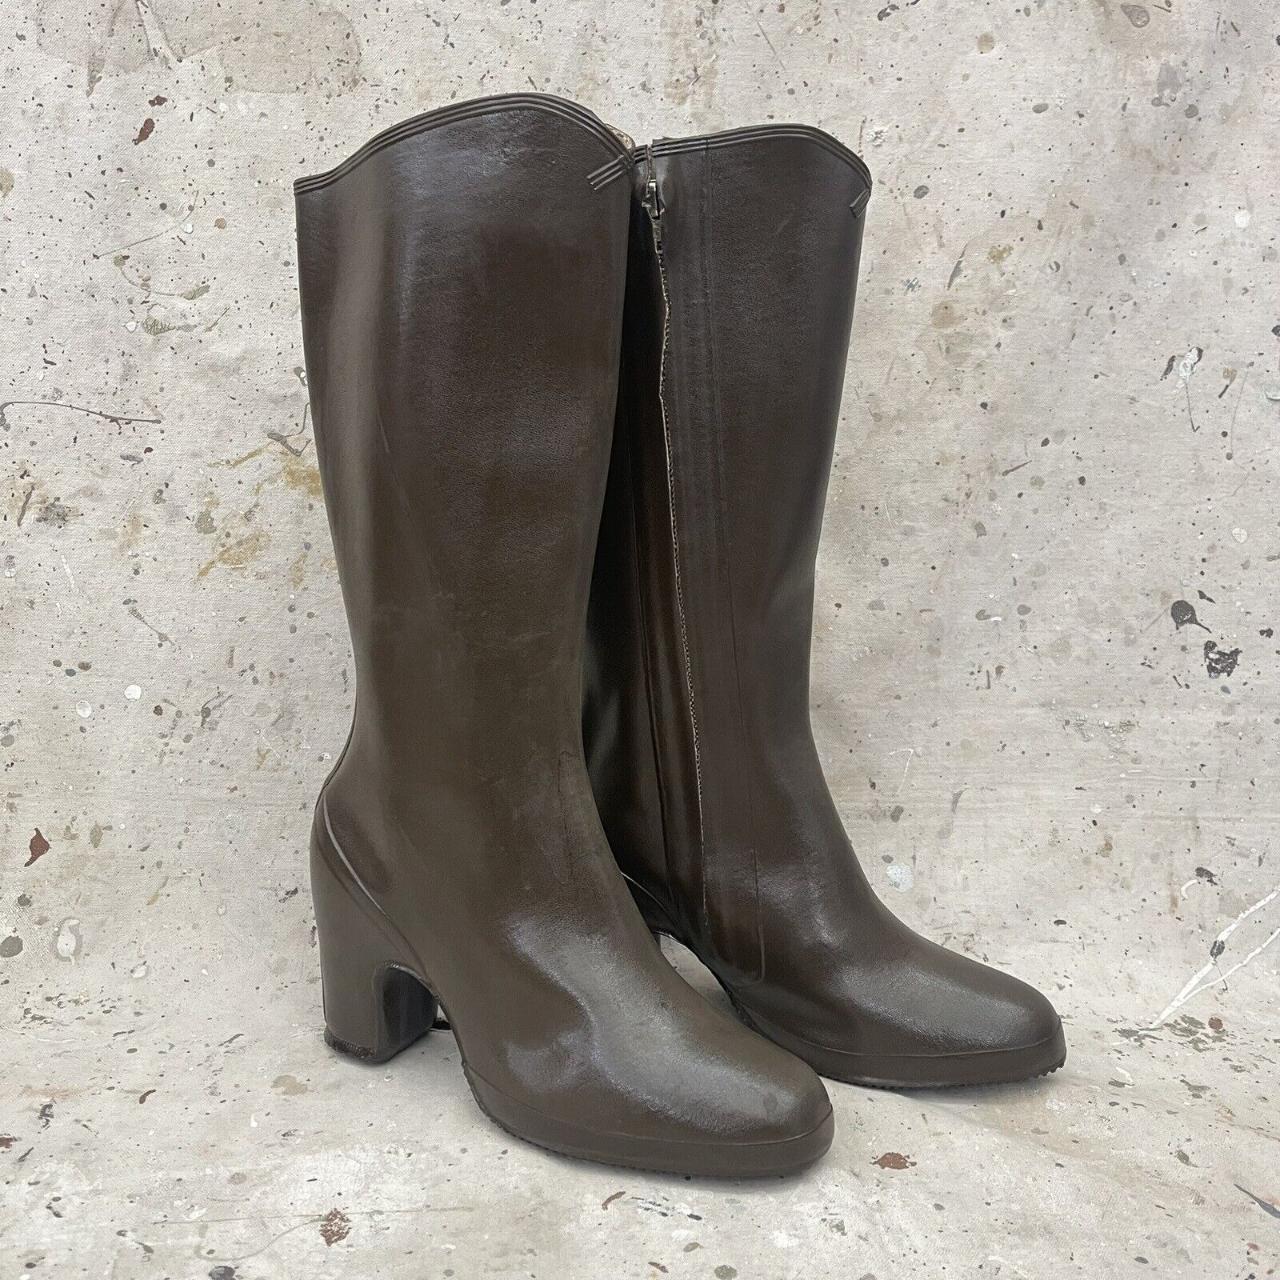 Adorable and beautifully made vintage rubber rain... - Depop